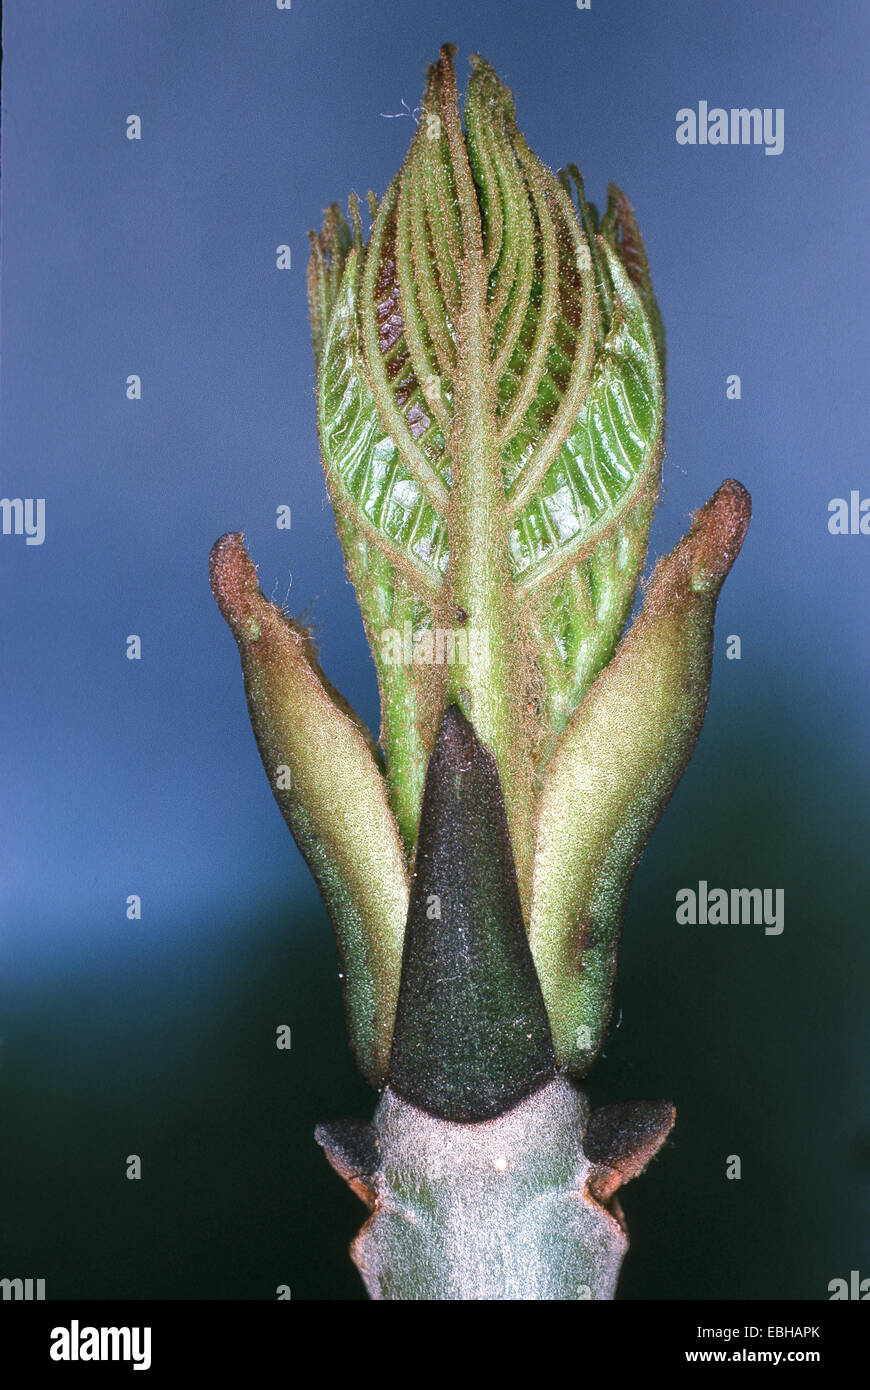 common ash (Fraxinus excelsior), buds and foliation. Stock Photo